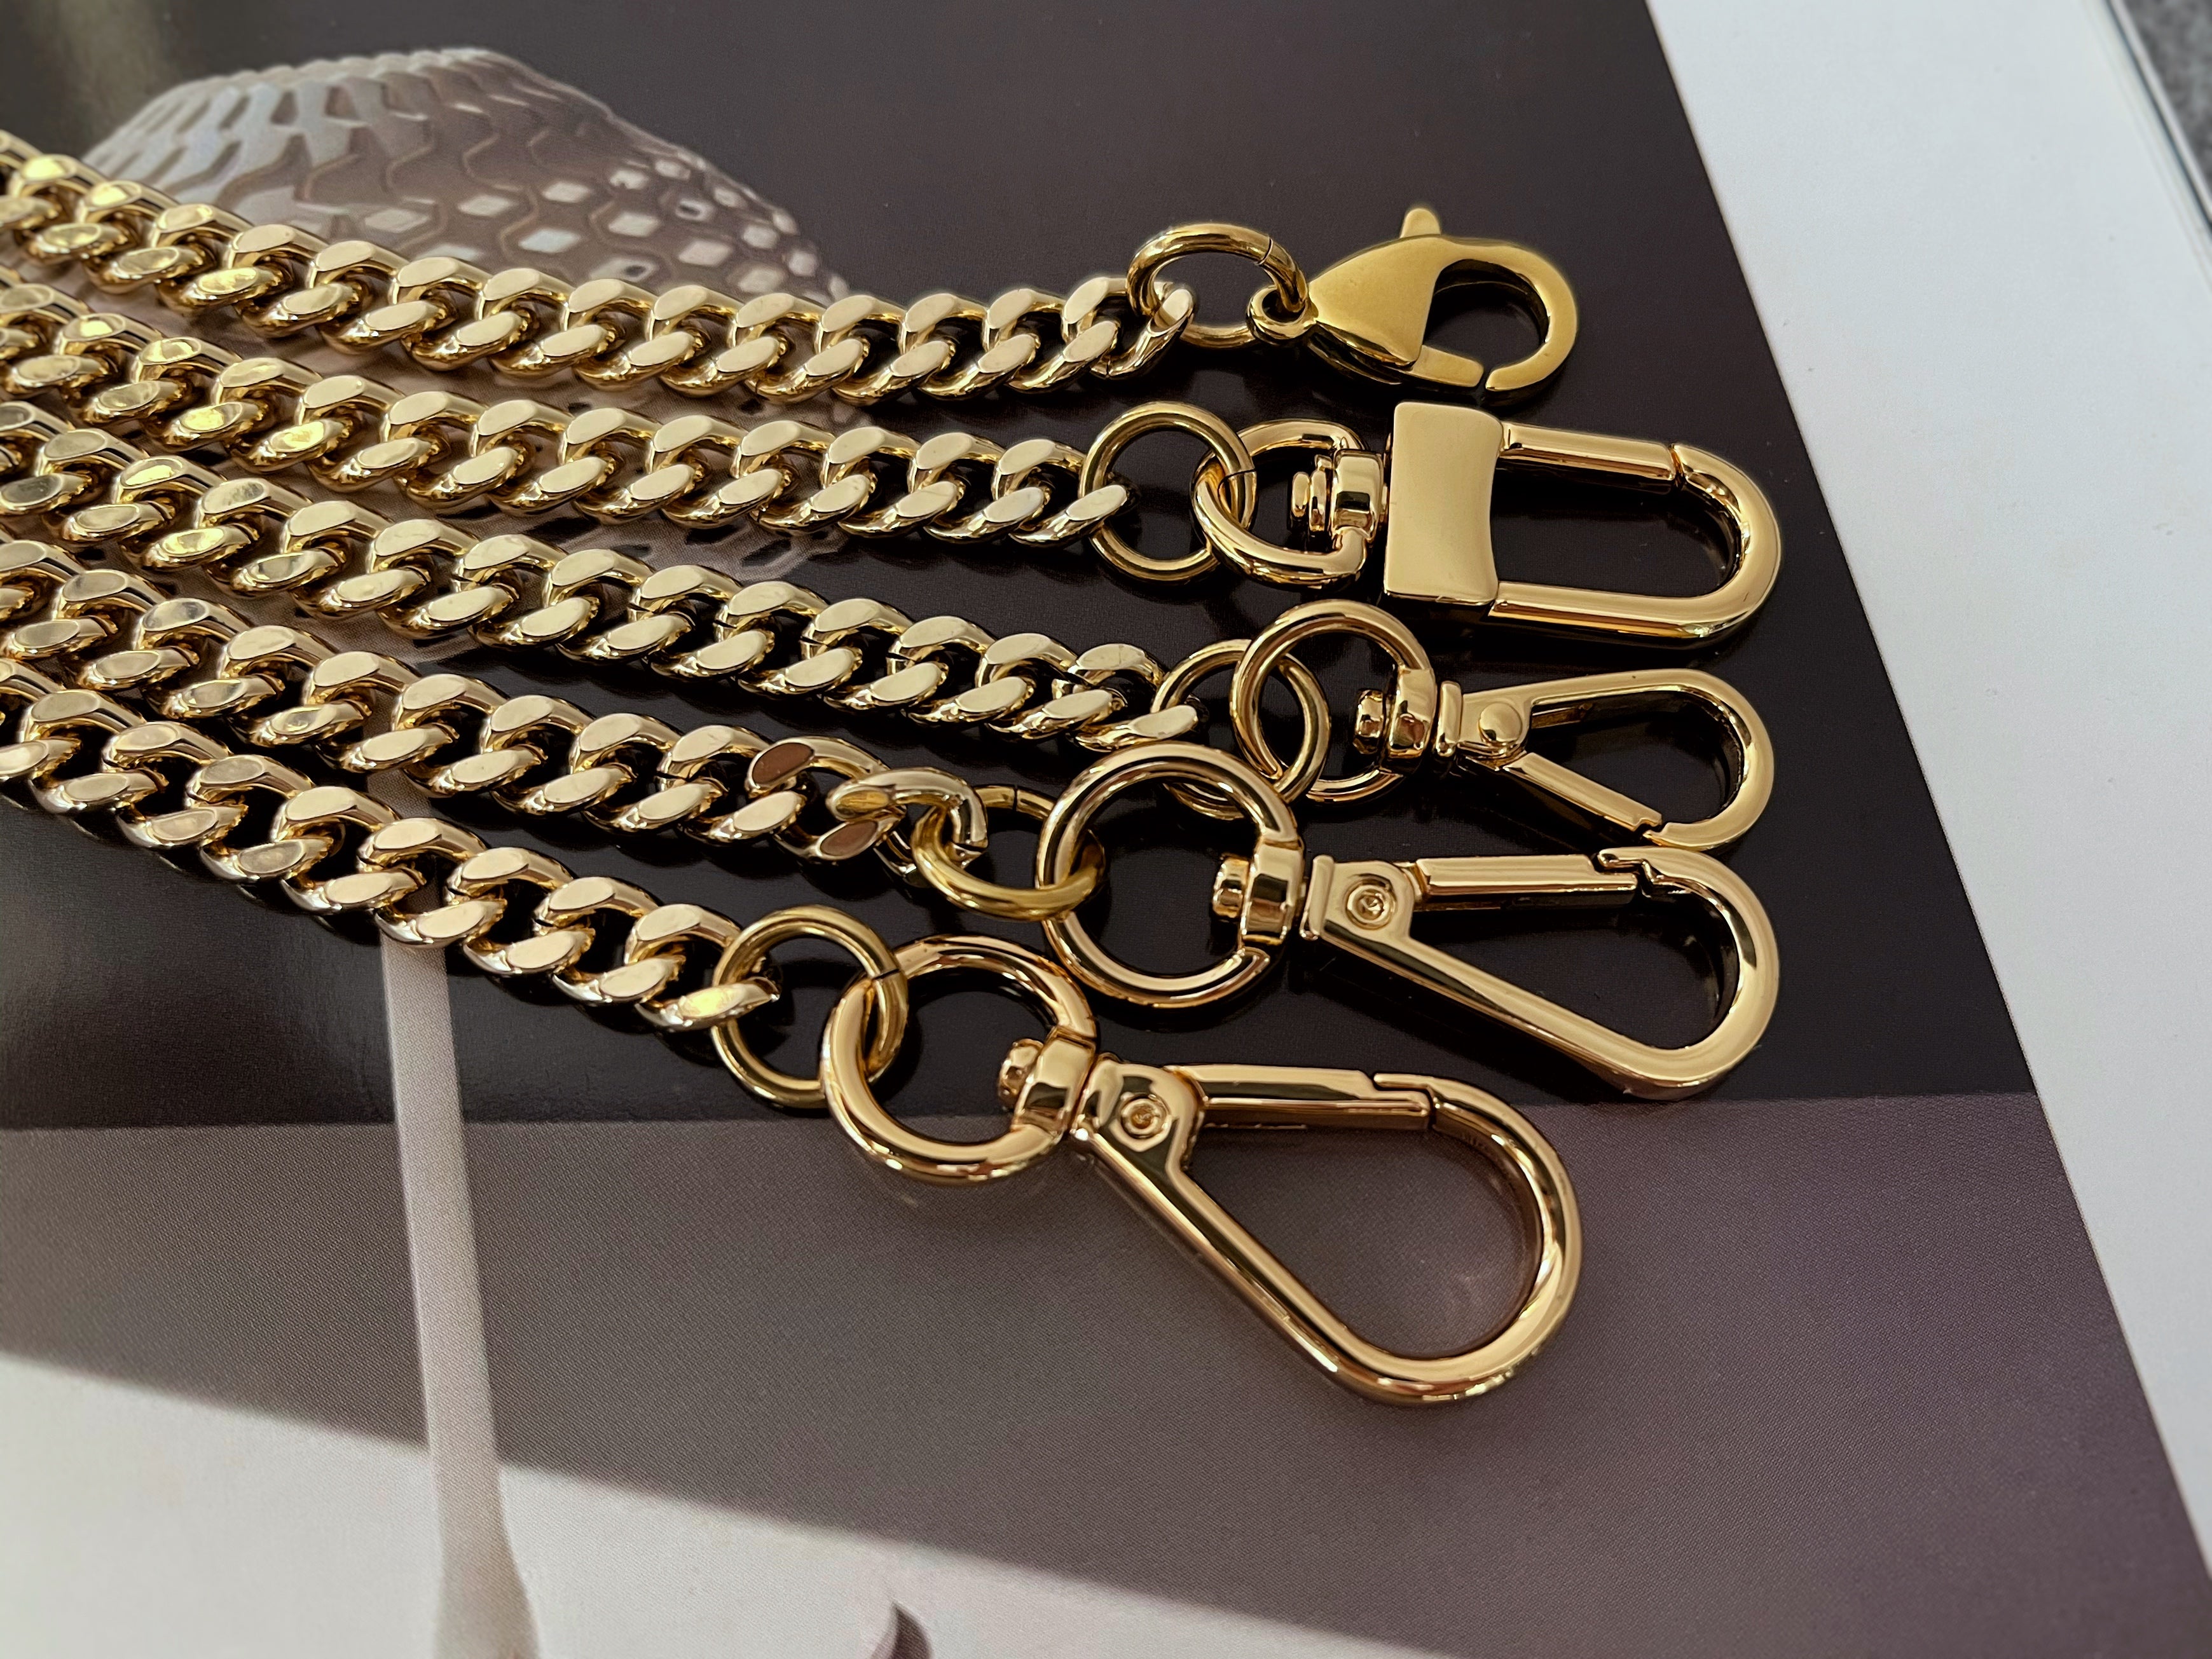 How-To: Add Chains to Your Handbags - Make